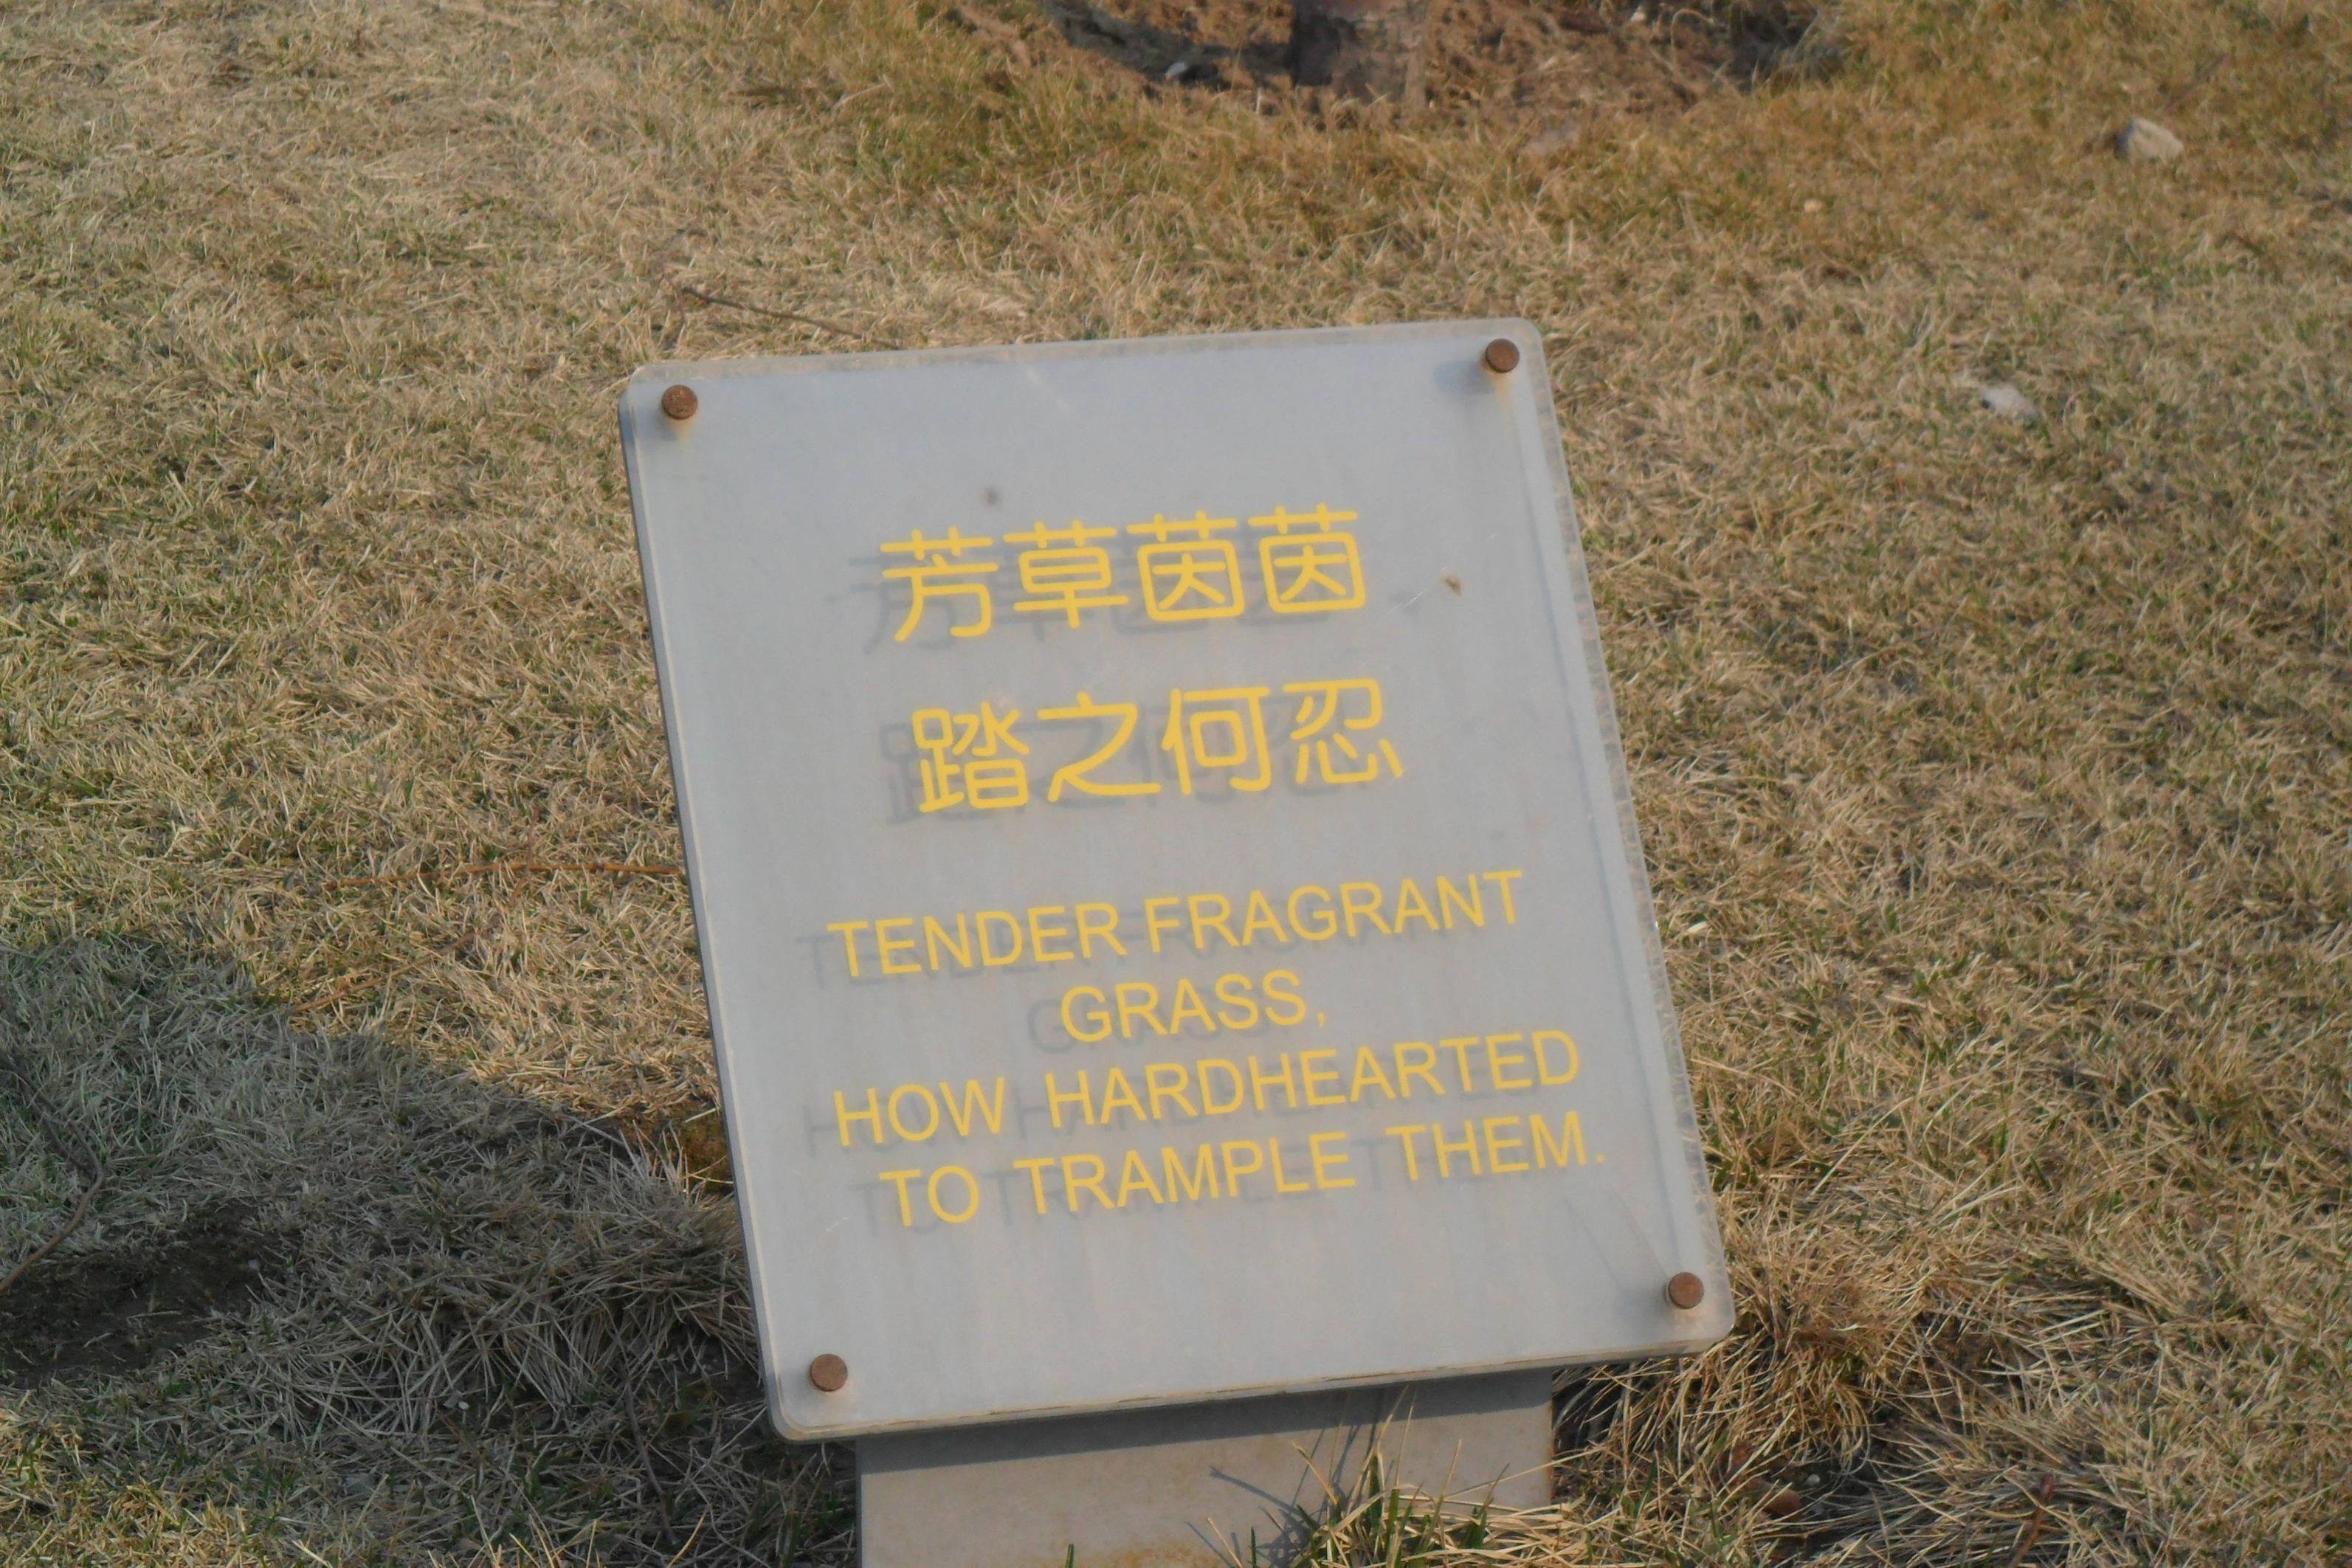 This "Stay Off The Grass" sign in the Beijing Olympic Park appeals.